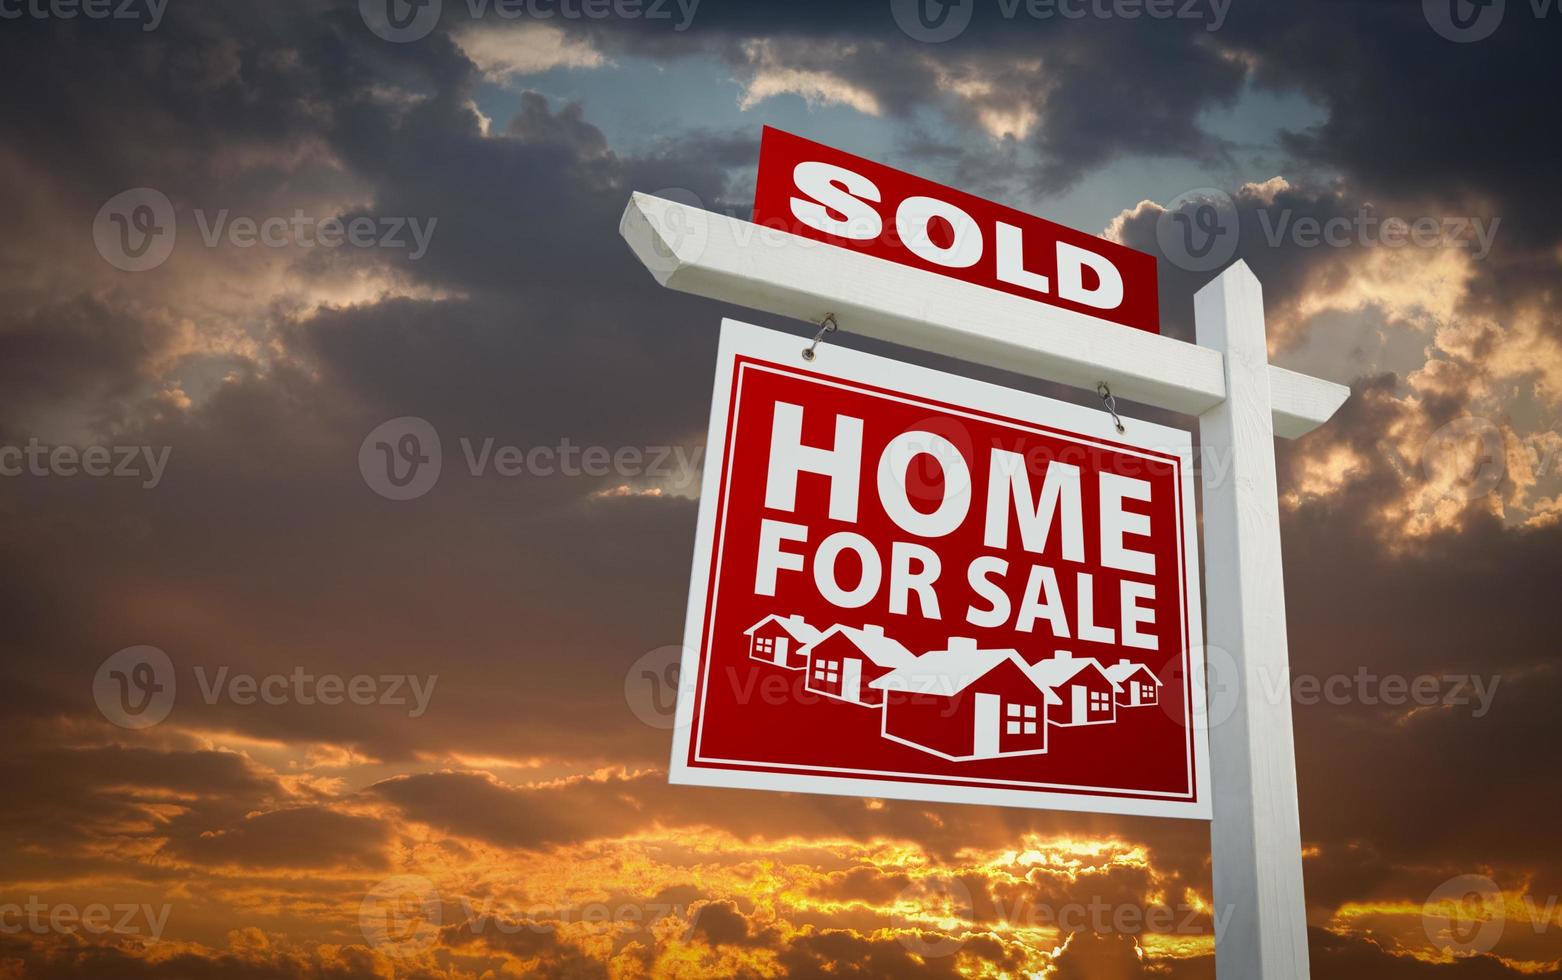 Red Sold Home For Sale Real Estate Sign Over Sunset Sky photo